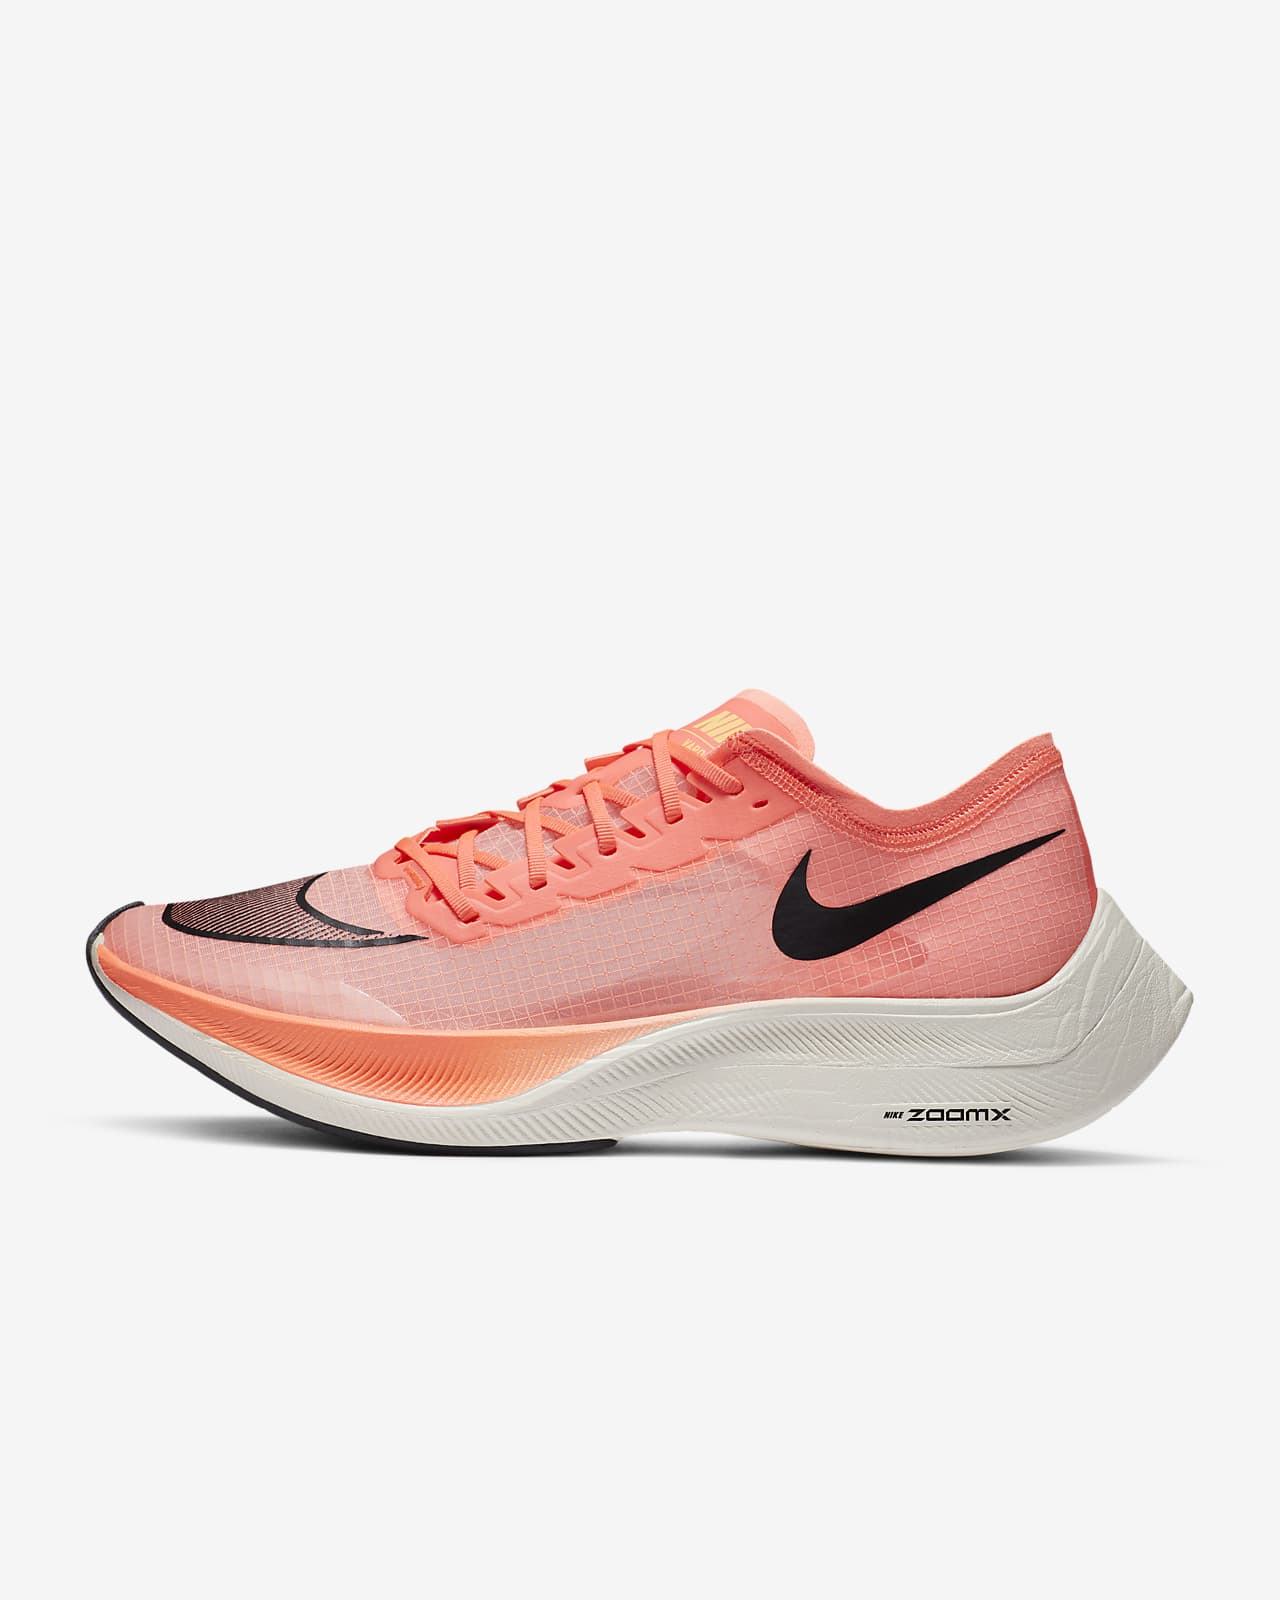 nike zoomx just do it